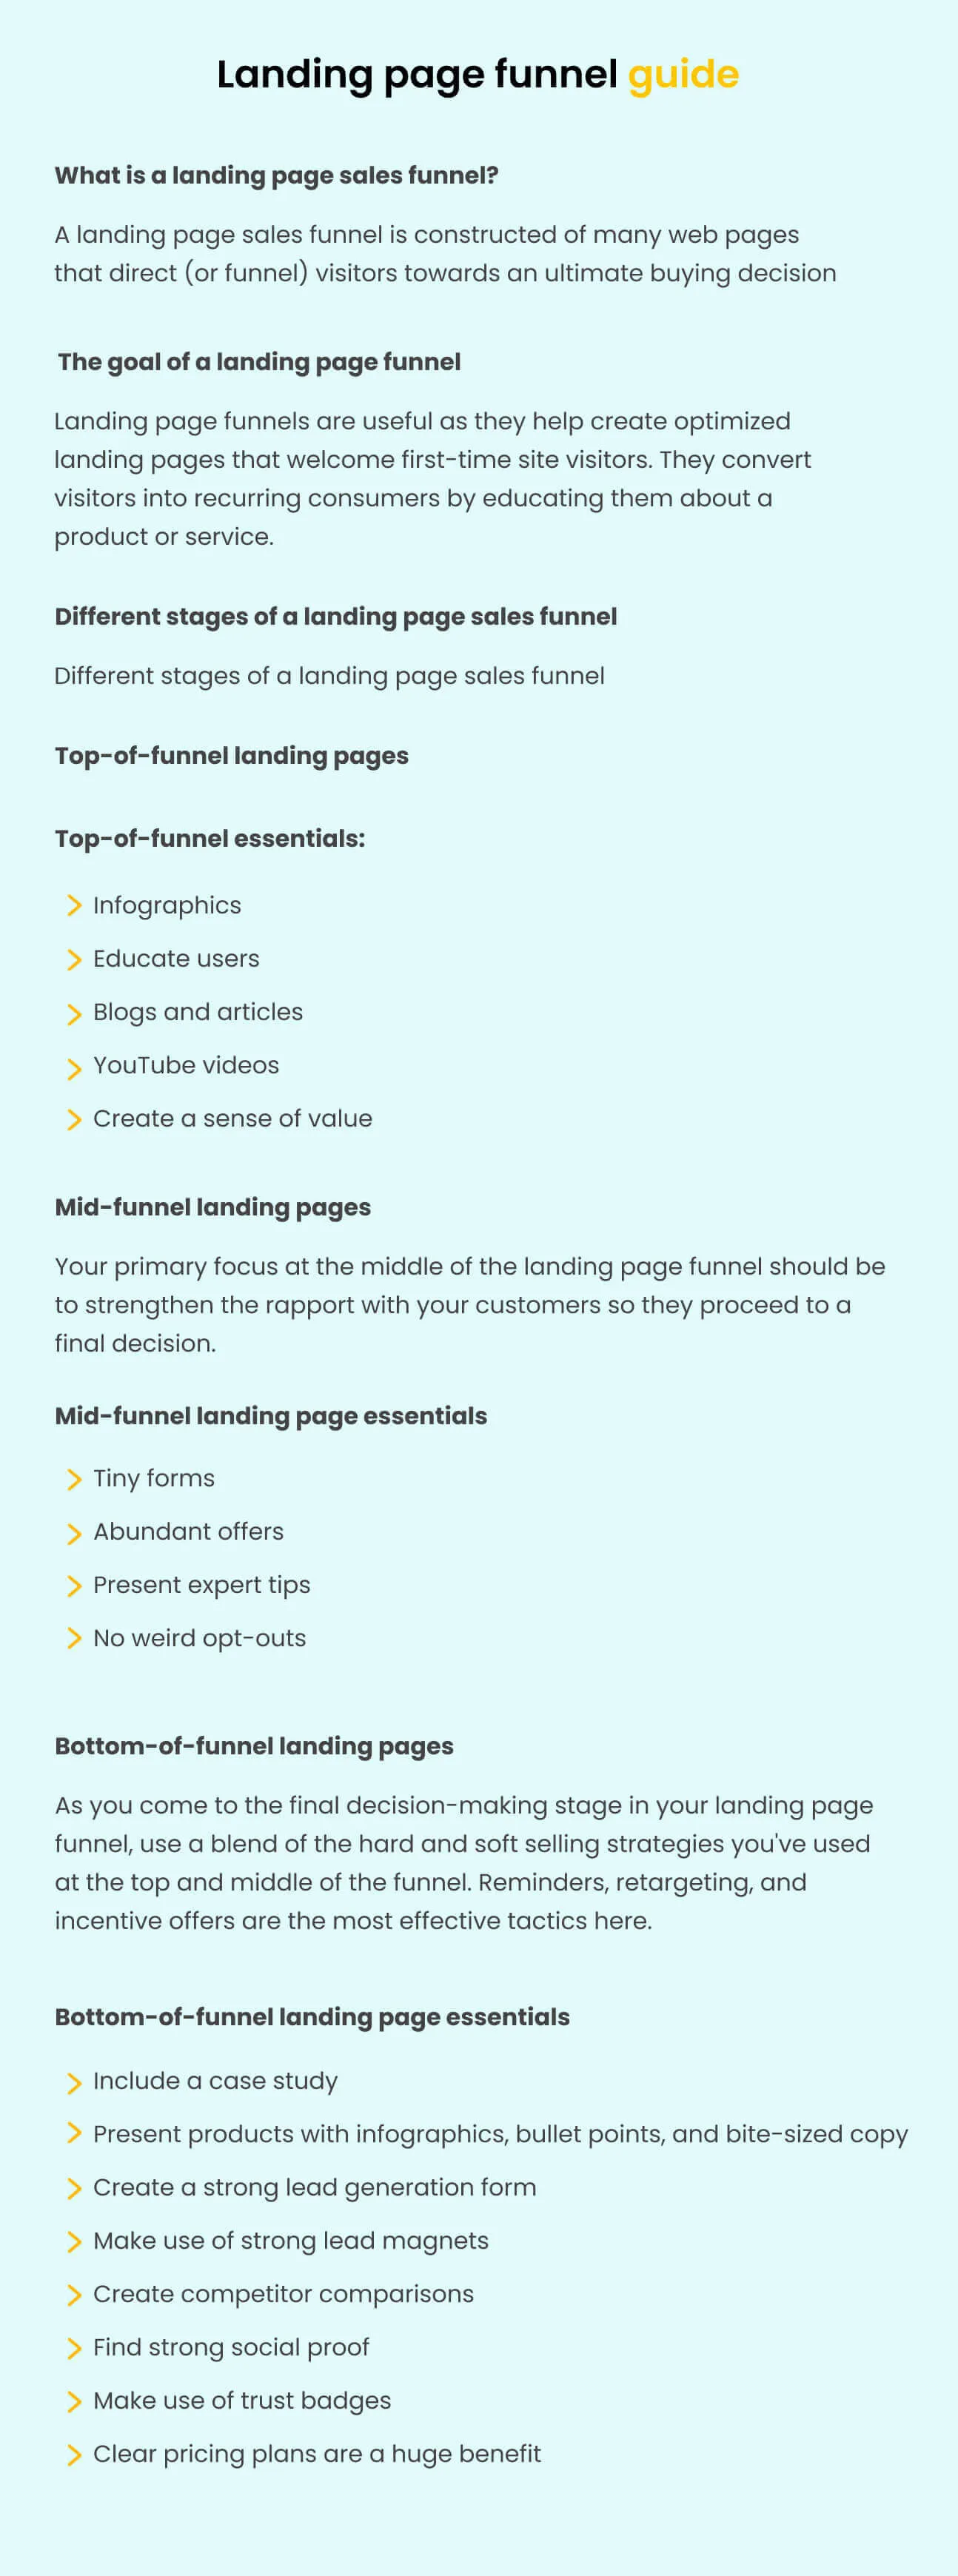 landing-page-funnel-guide-summary.webp